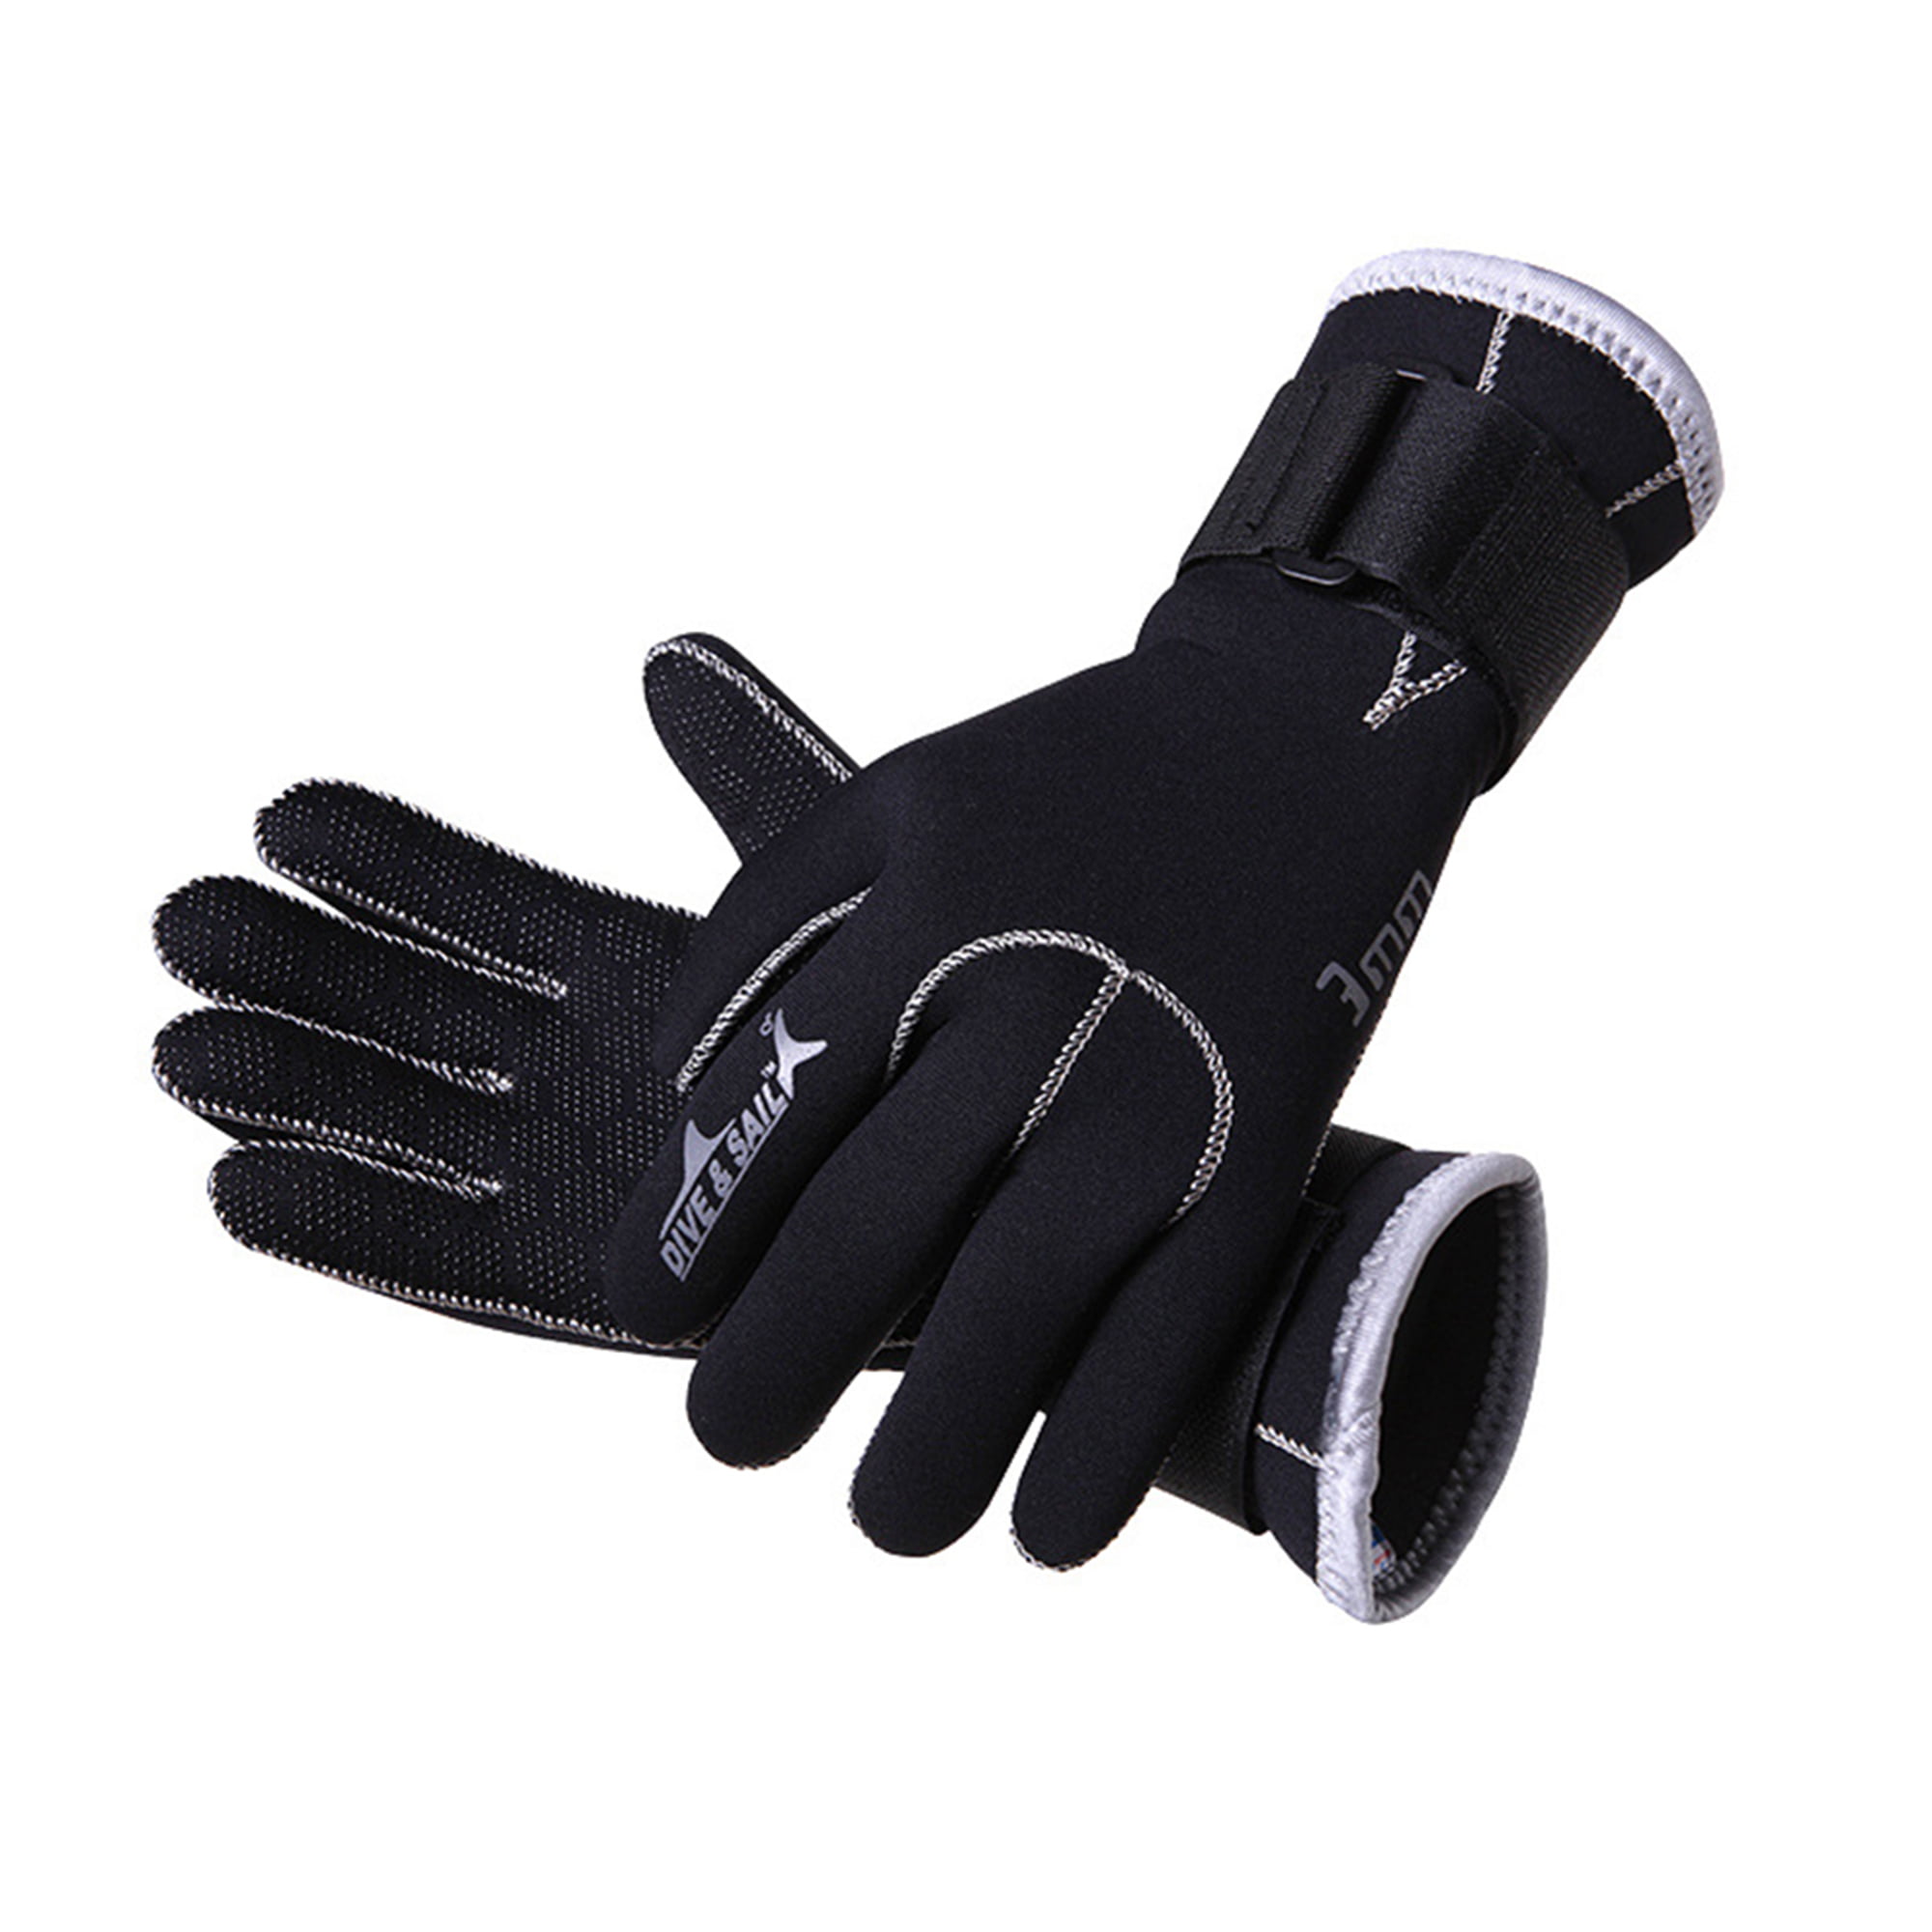 Details about   3mm Neoprene Scuba Diving Snorkeling Surfing Spearfishing Water Sports Gloves 